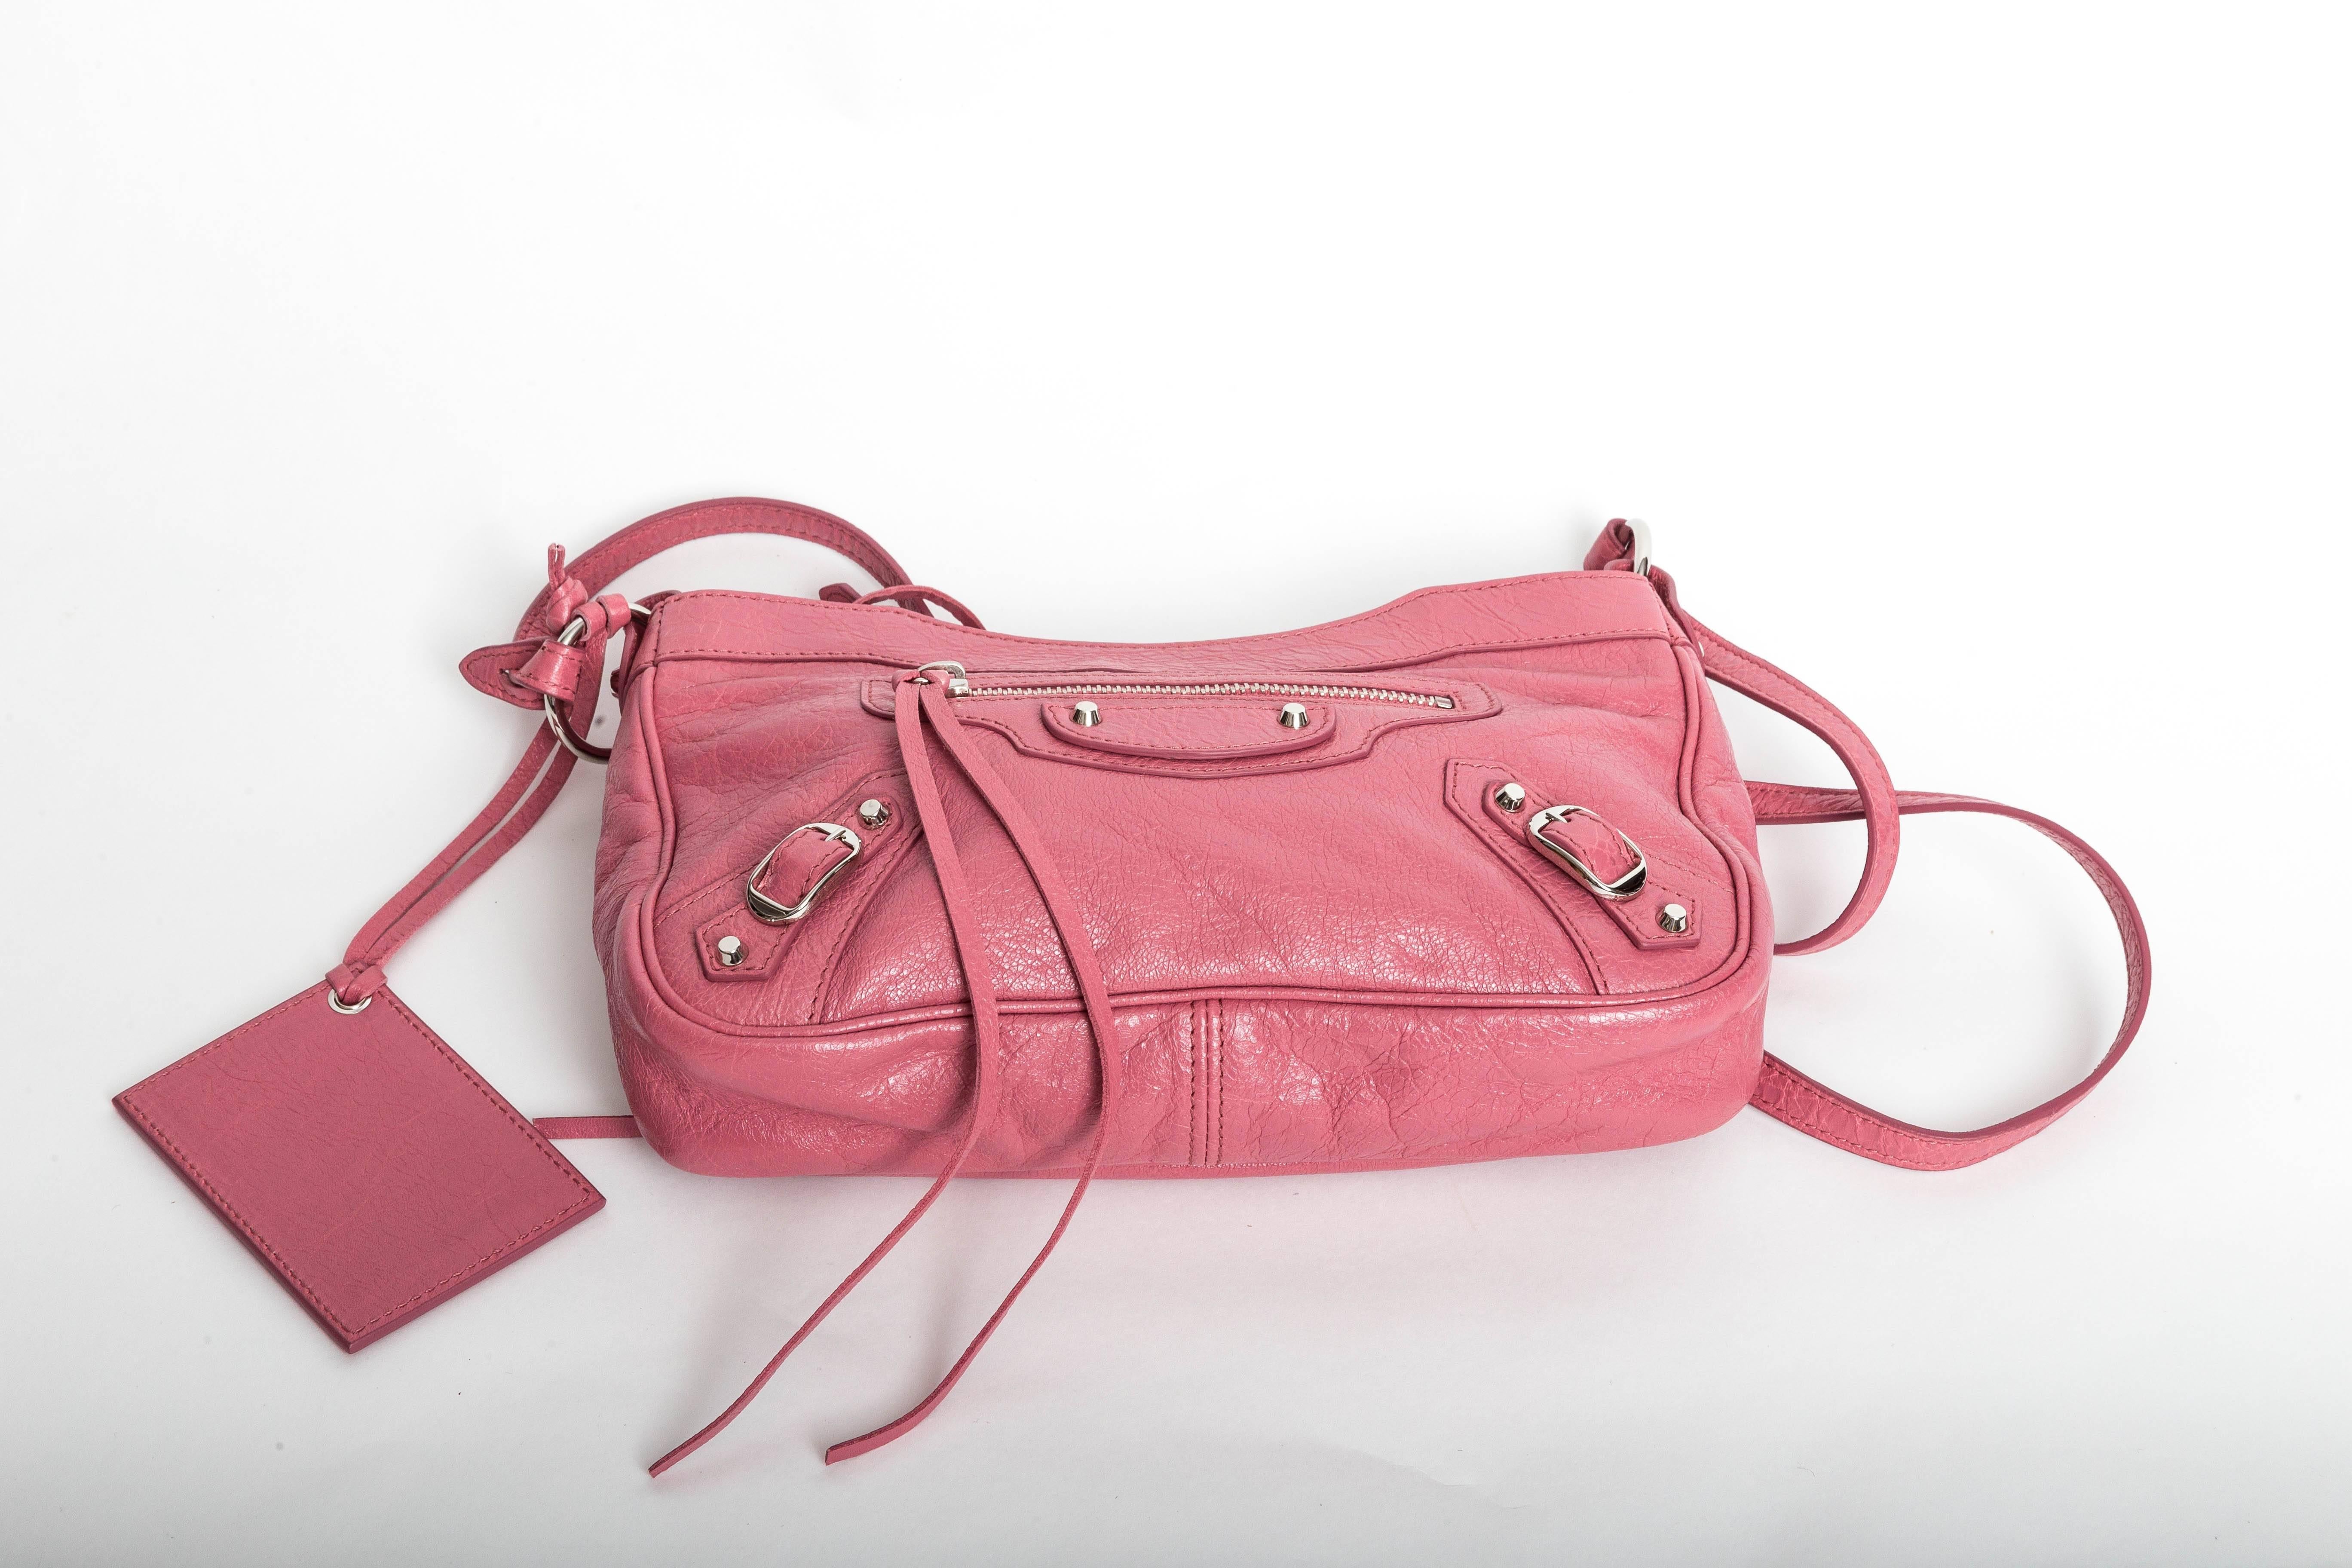 Balenciaga Pink Small City Bag
Condition is Excellent
Dust bag is included.
Features one interior zip pocket and one exteiror zip pocket.
Crossbody